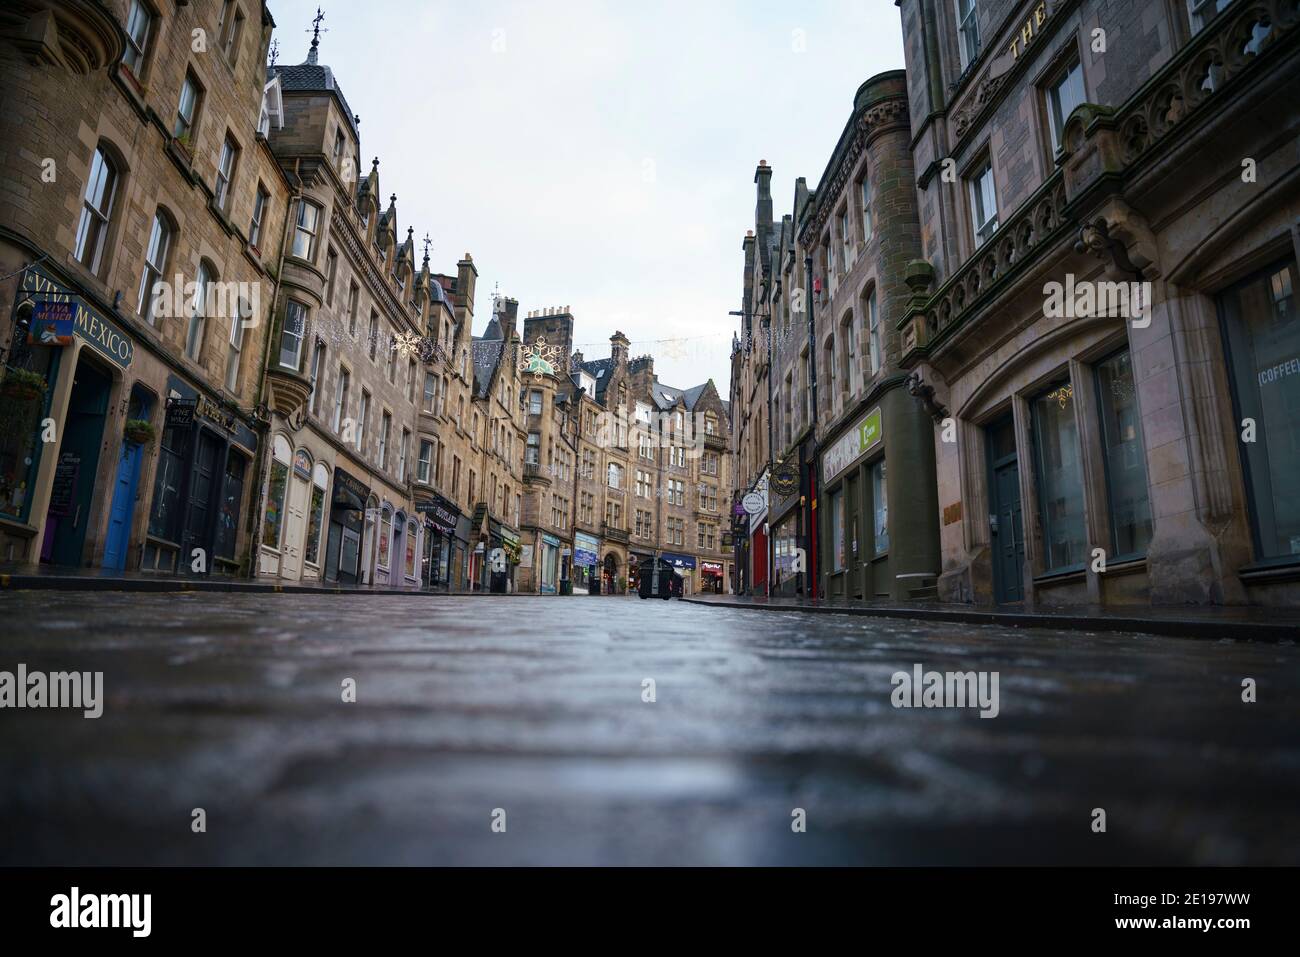 Edinburgh, Scotland, UK. 5 January 2021. Views of a virtually deserted Edinburgh City Centre as Scotland wakes up to the first day of a new strict national lockdown announced by Scottish Government to contain new upsurge in Covid-19 infections. Pic; Cockburn Street in Old Town almost deserted with all shops closed.  Iain Masterton/Alamy Live News Stock Photo